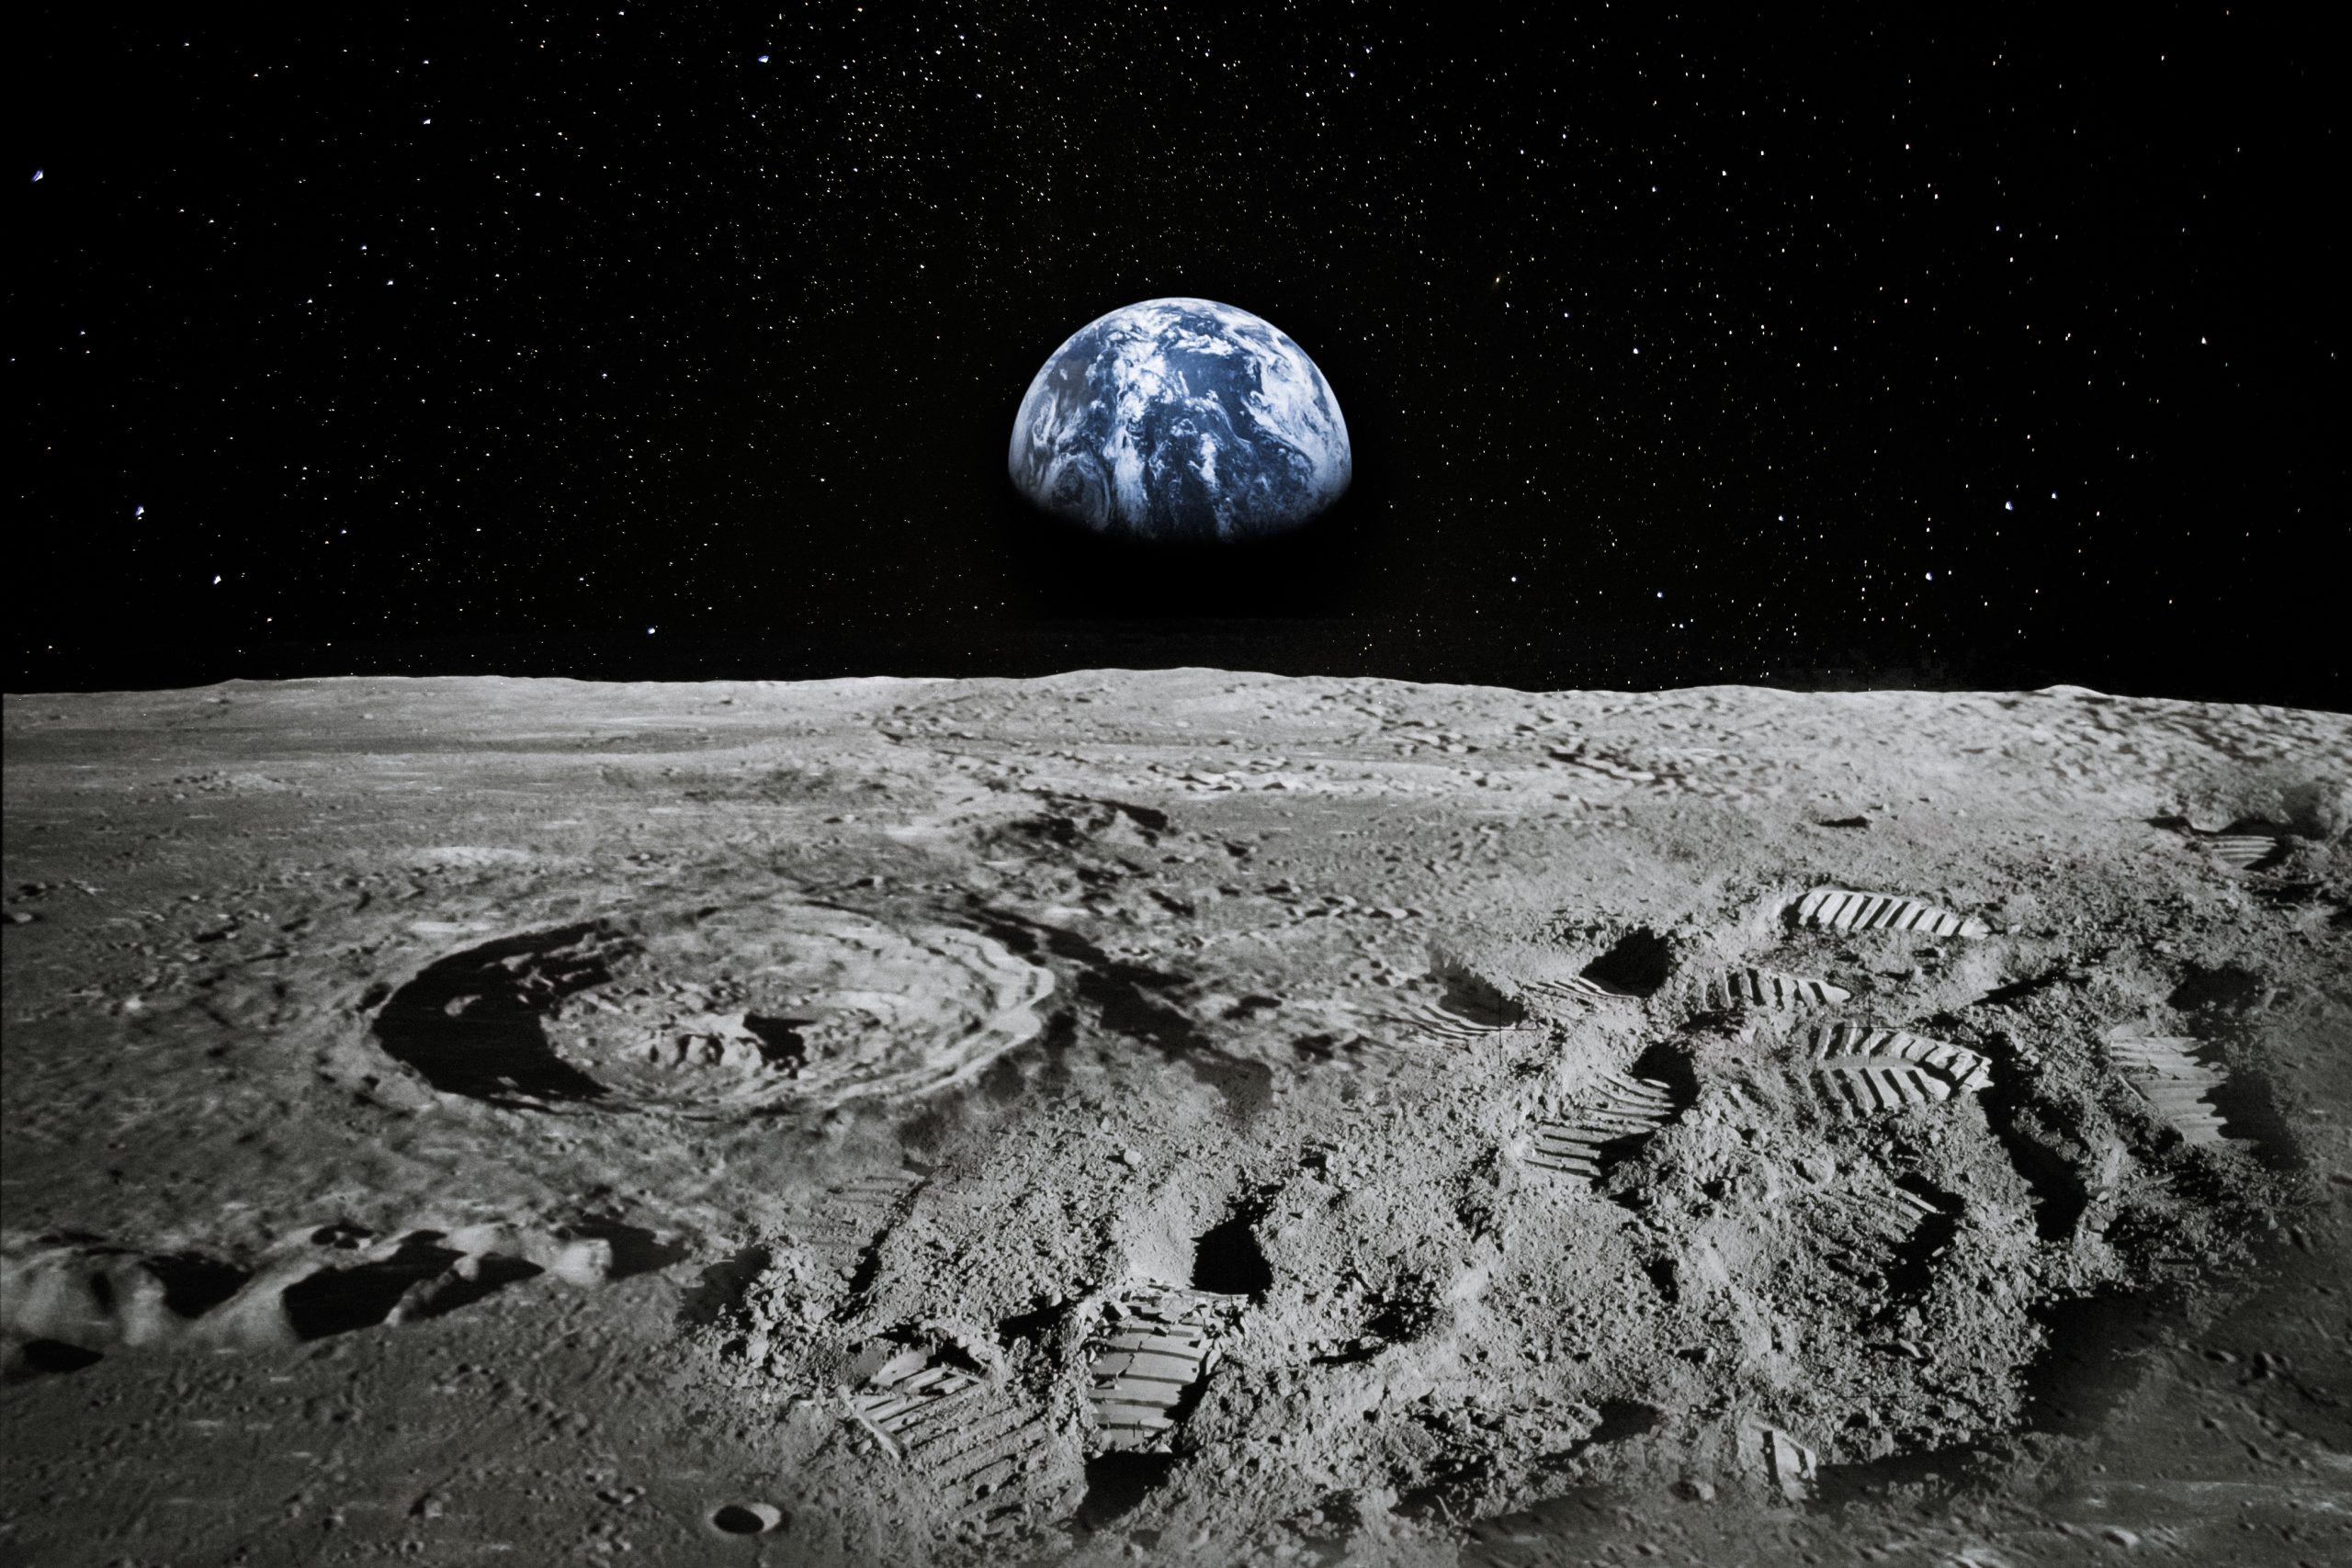 Surface of the moon with the earth rising on the horizon.